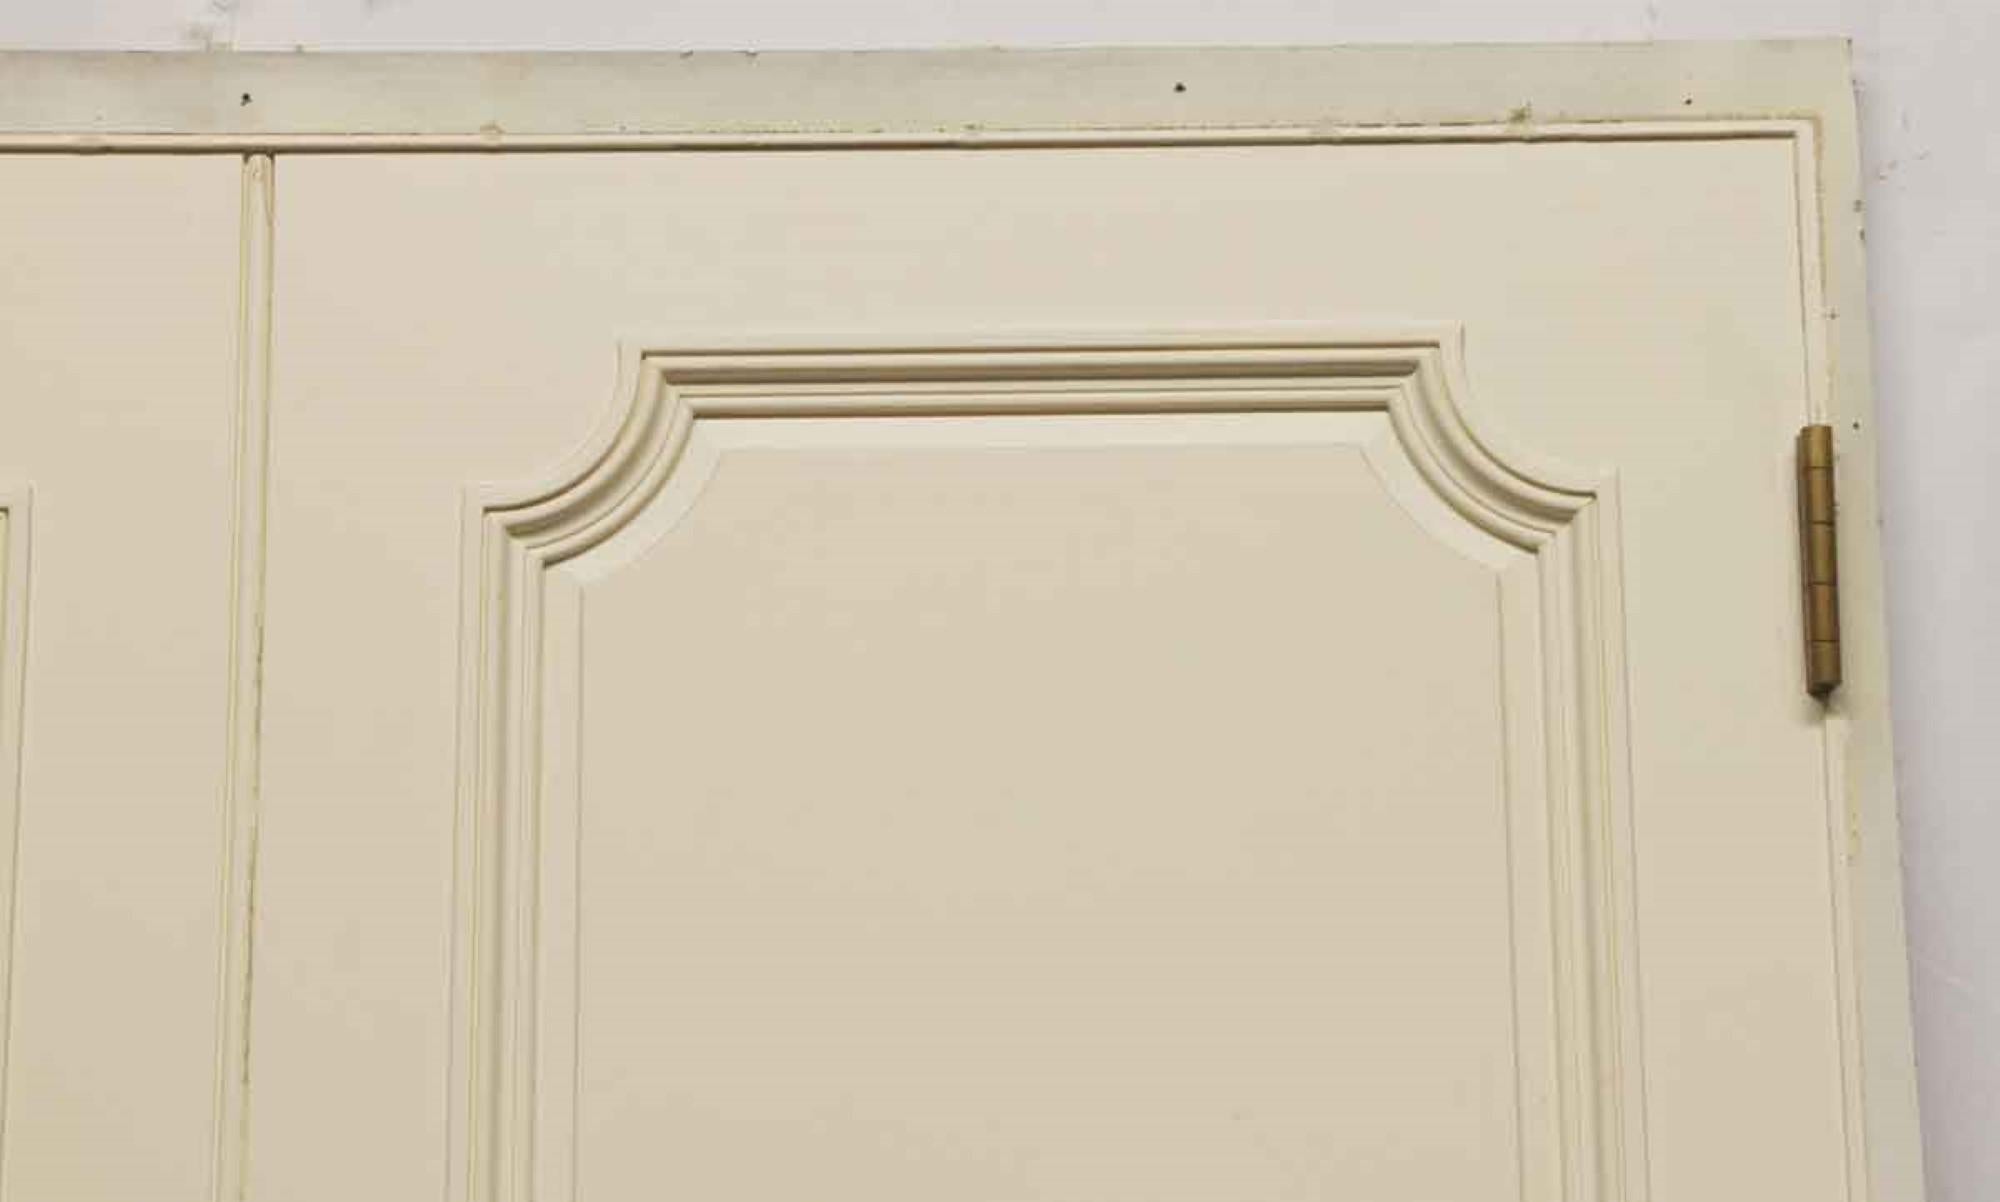 Single 1980s white painted wood faux double door panel with French door hardware. When installed this gives the illusion of a pair of doors where none exist. Retrieved from a New York City Apartment on 5th Ave. This can be seen at our 400 Gilligan